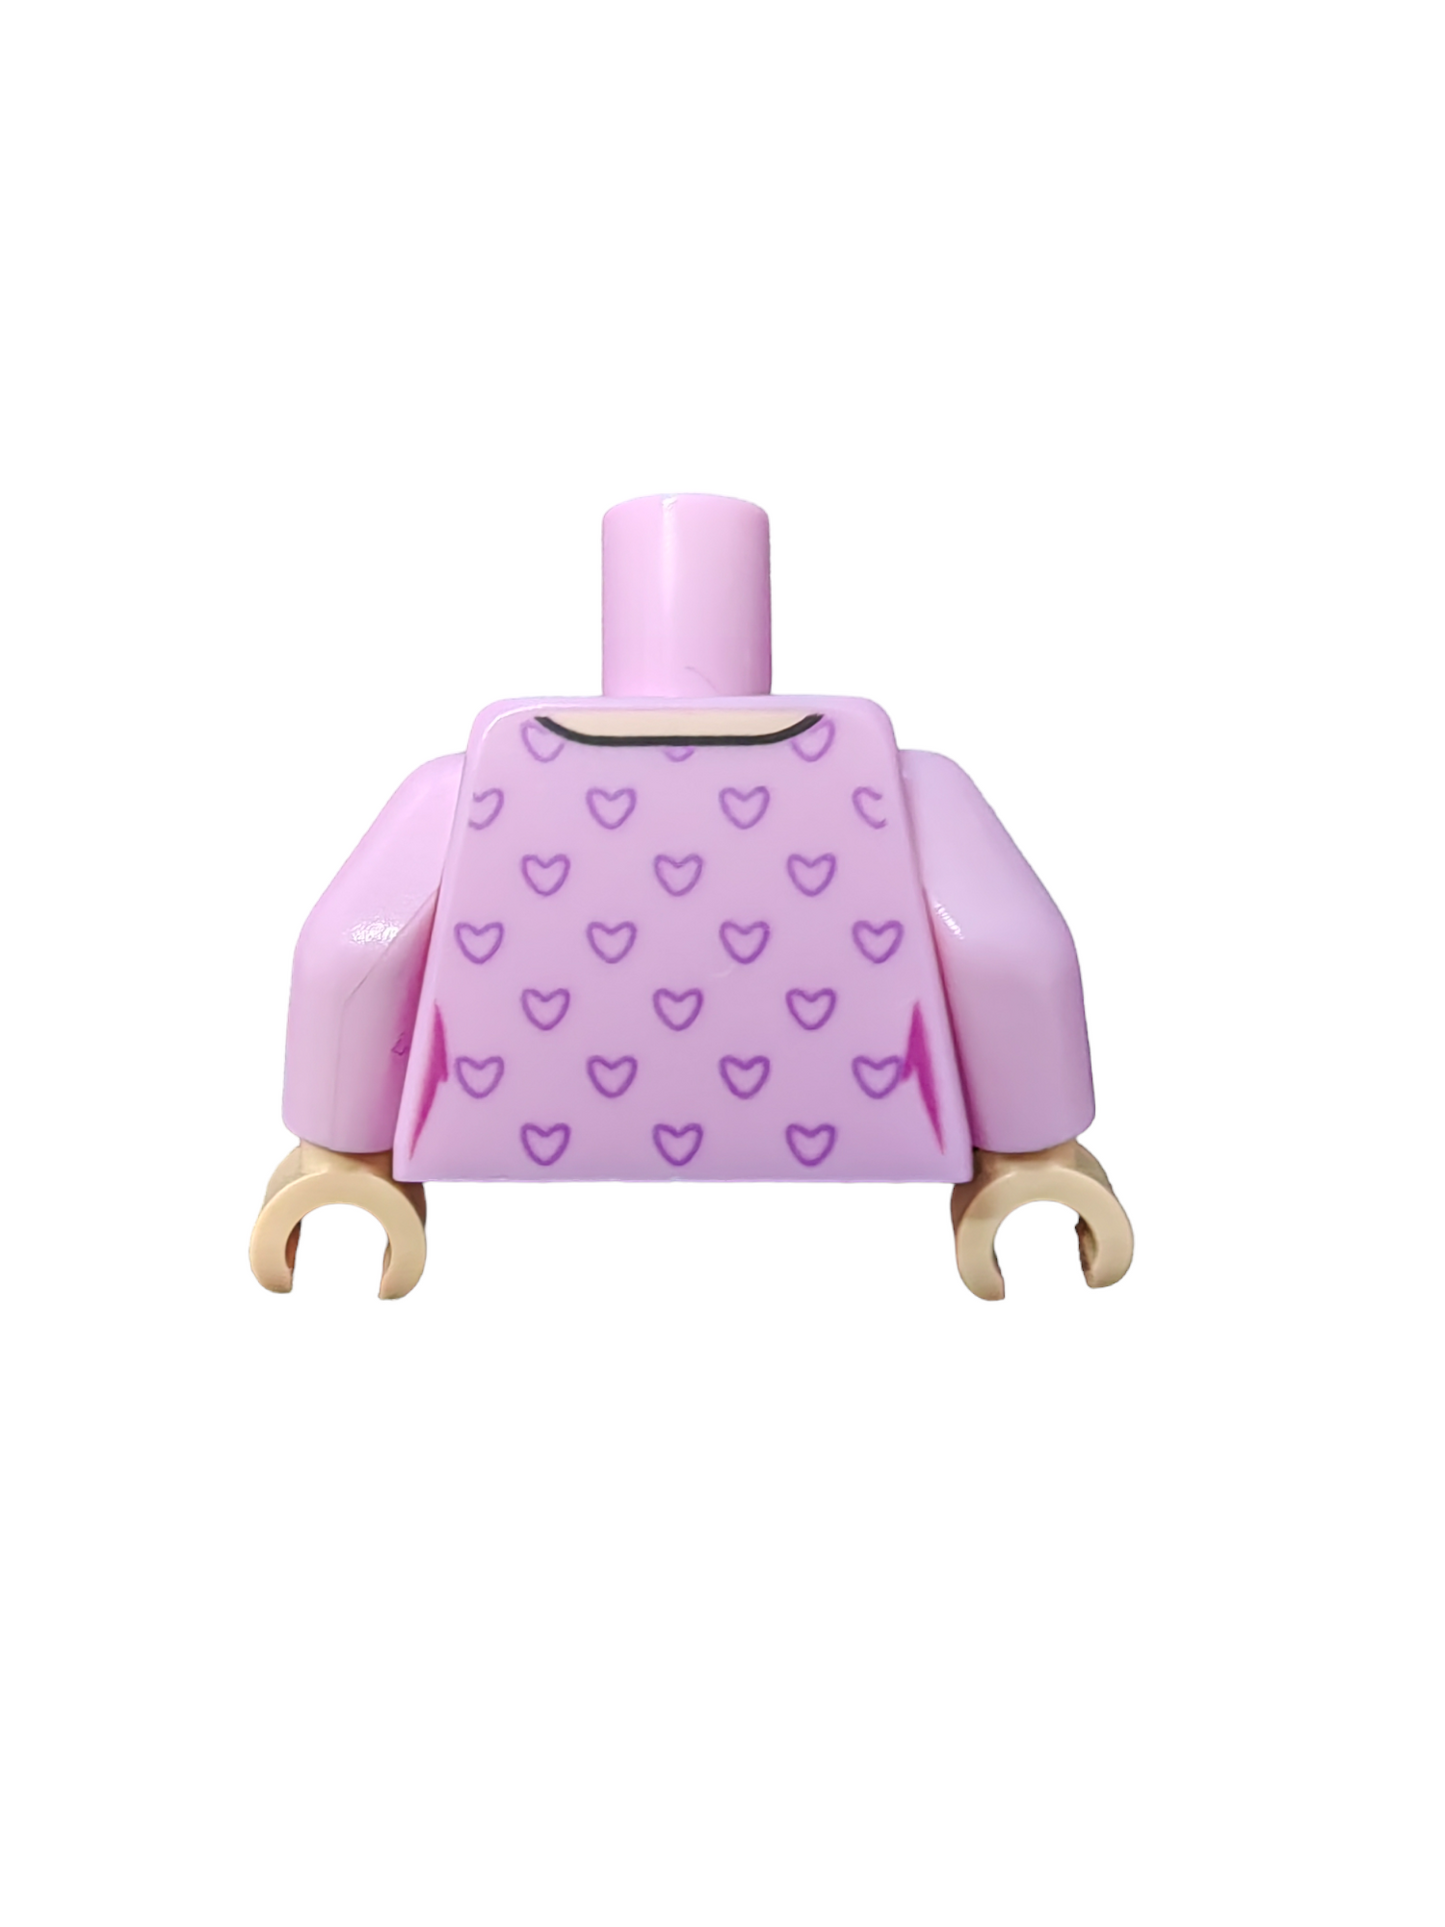 LEGO Torso, Silver Necklace with Charms, Lavender Heart Pattern - UB1090